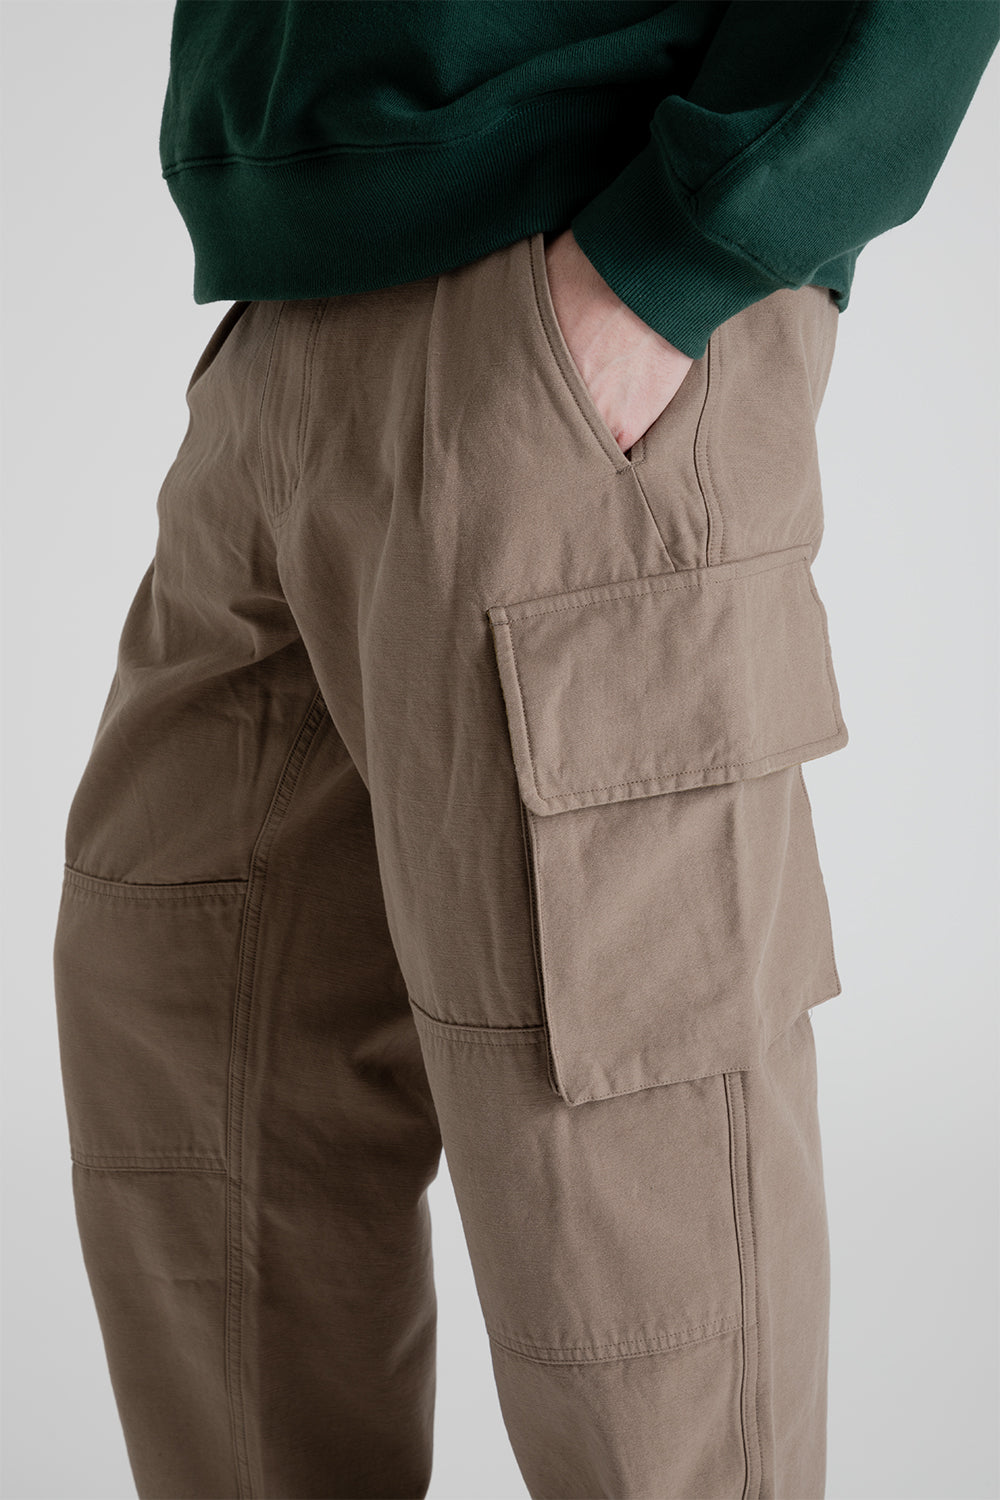 Frizmworks M47 French Army Pants in Stone Brown